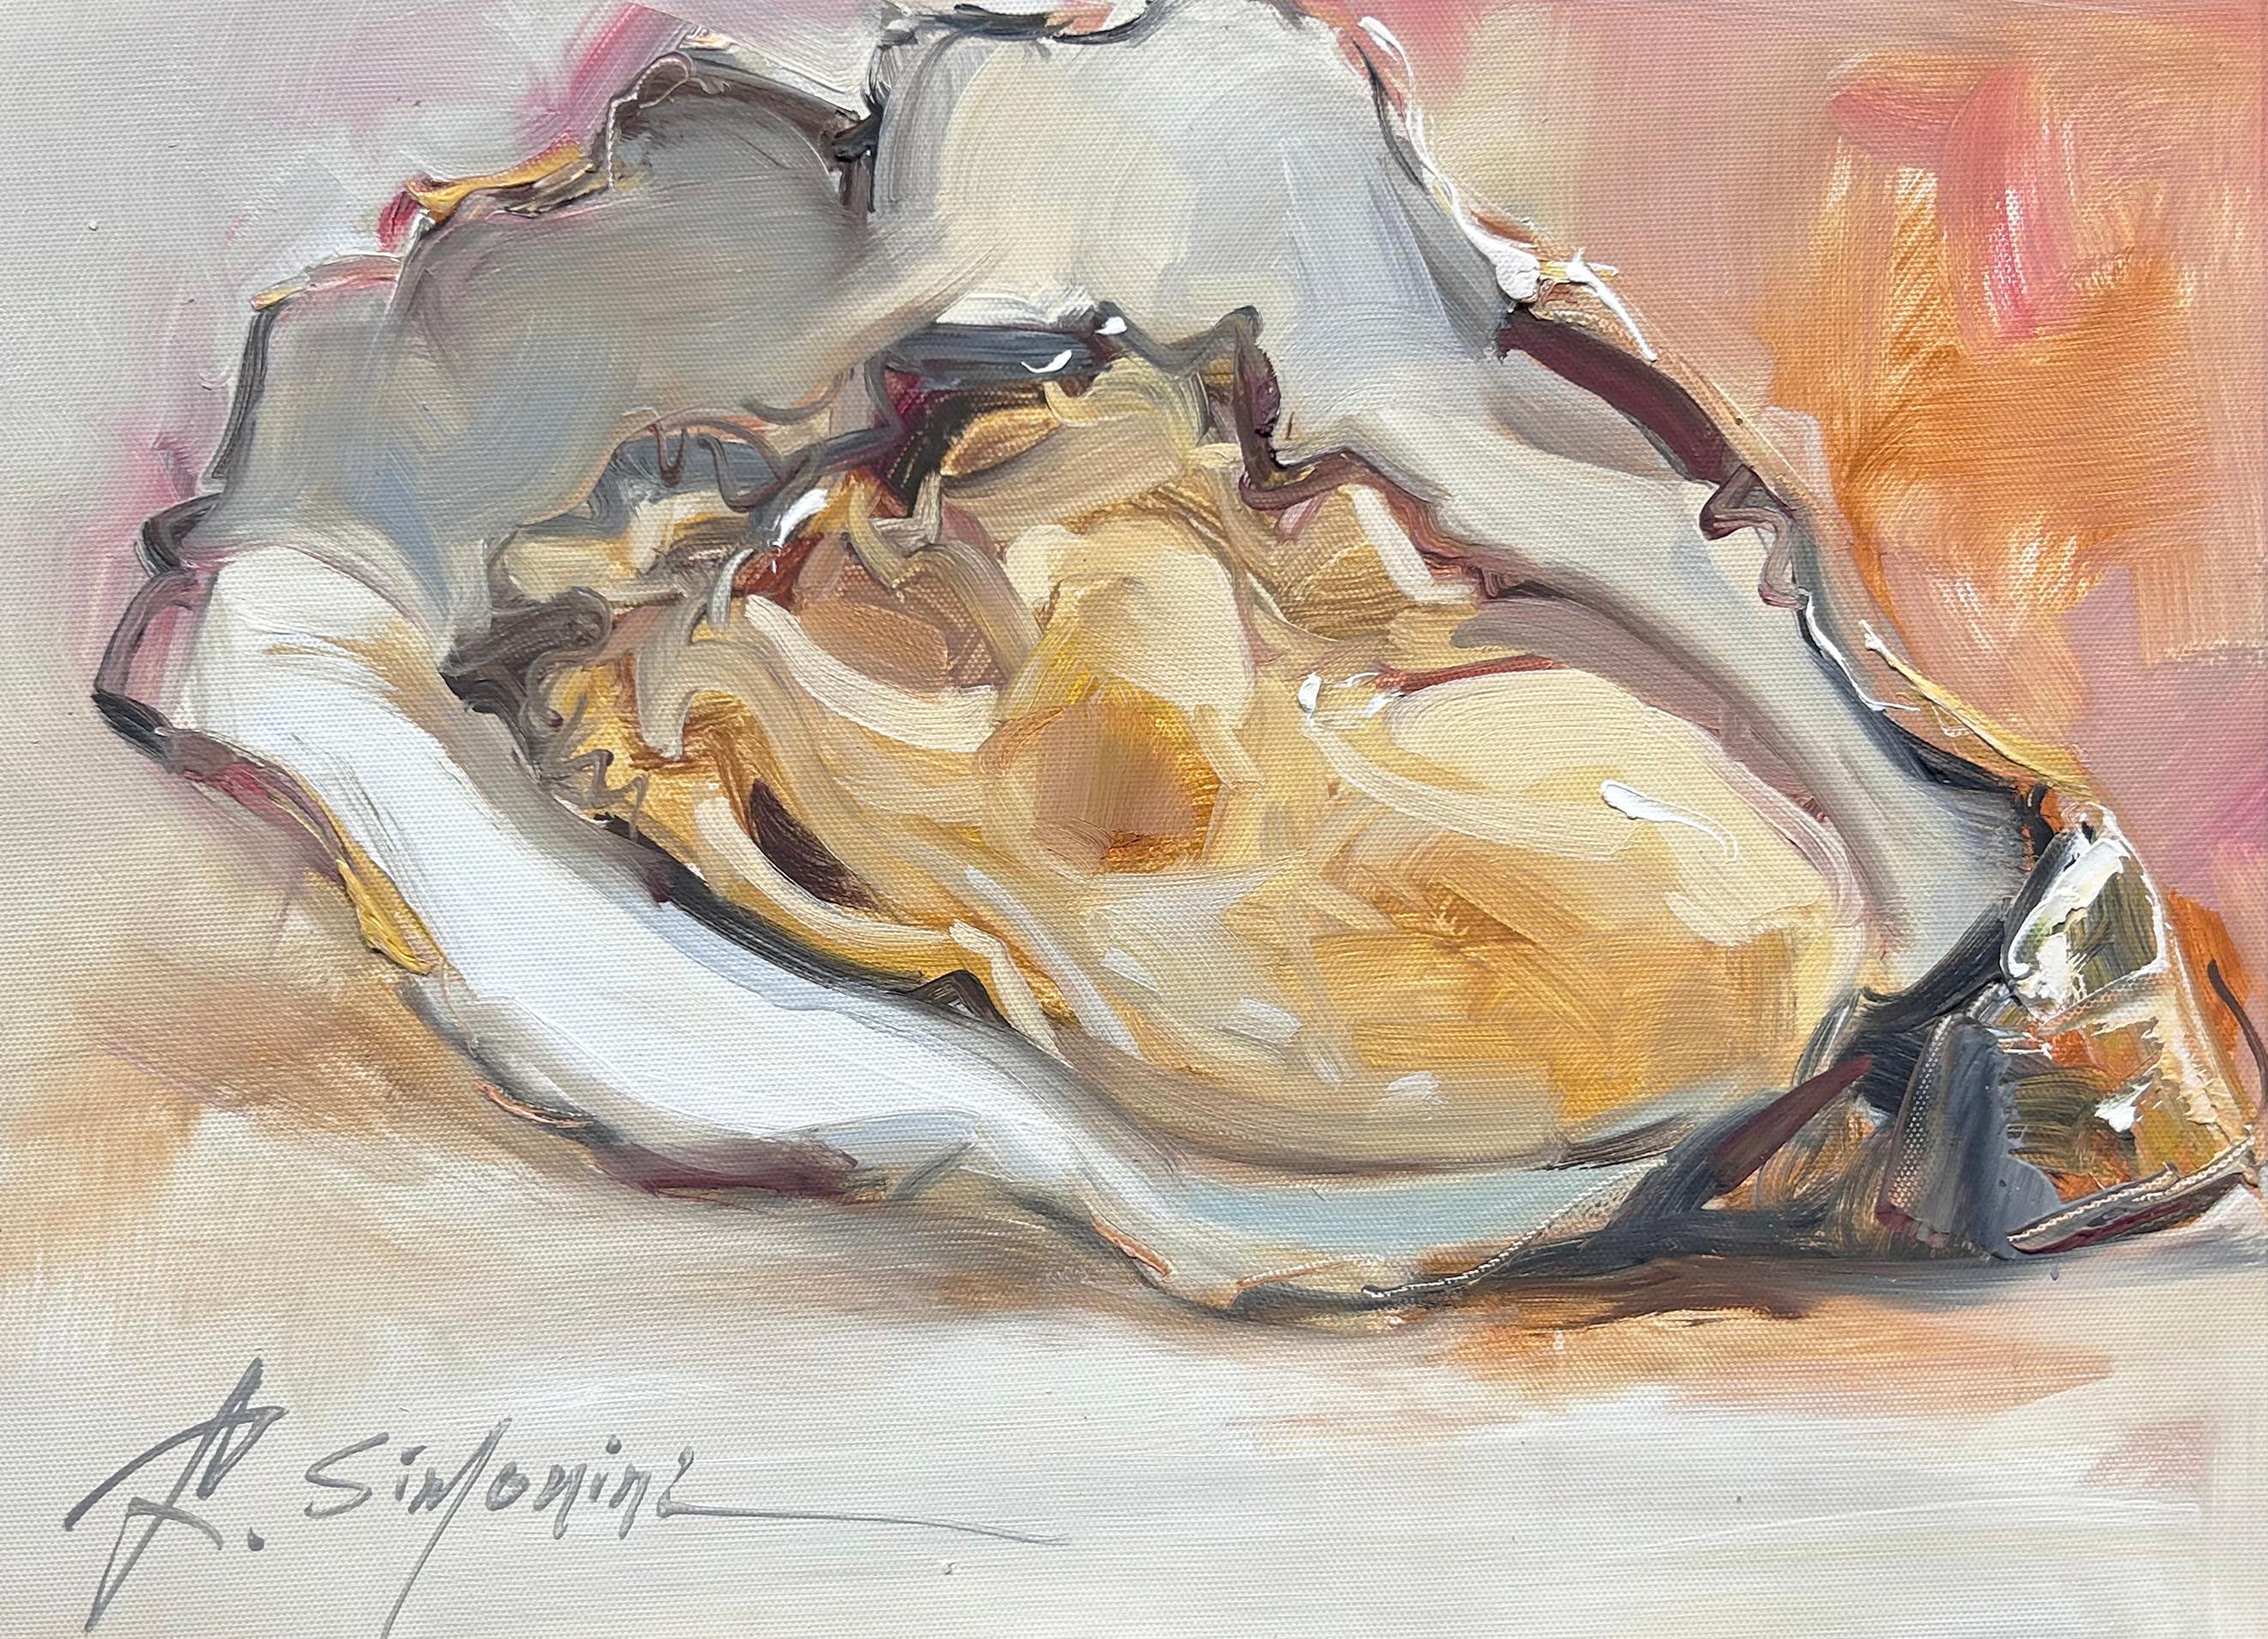 This painting by artist Ray Simonini titled "Oyster" is a 12x16 nautical oil painting on canvas featuring a close-up of an oyster shell against a colorful orange background. 

About the artist:
Simonini was born in China in 1981. He became intrigued